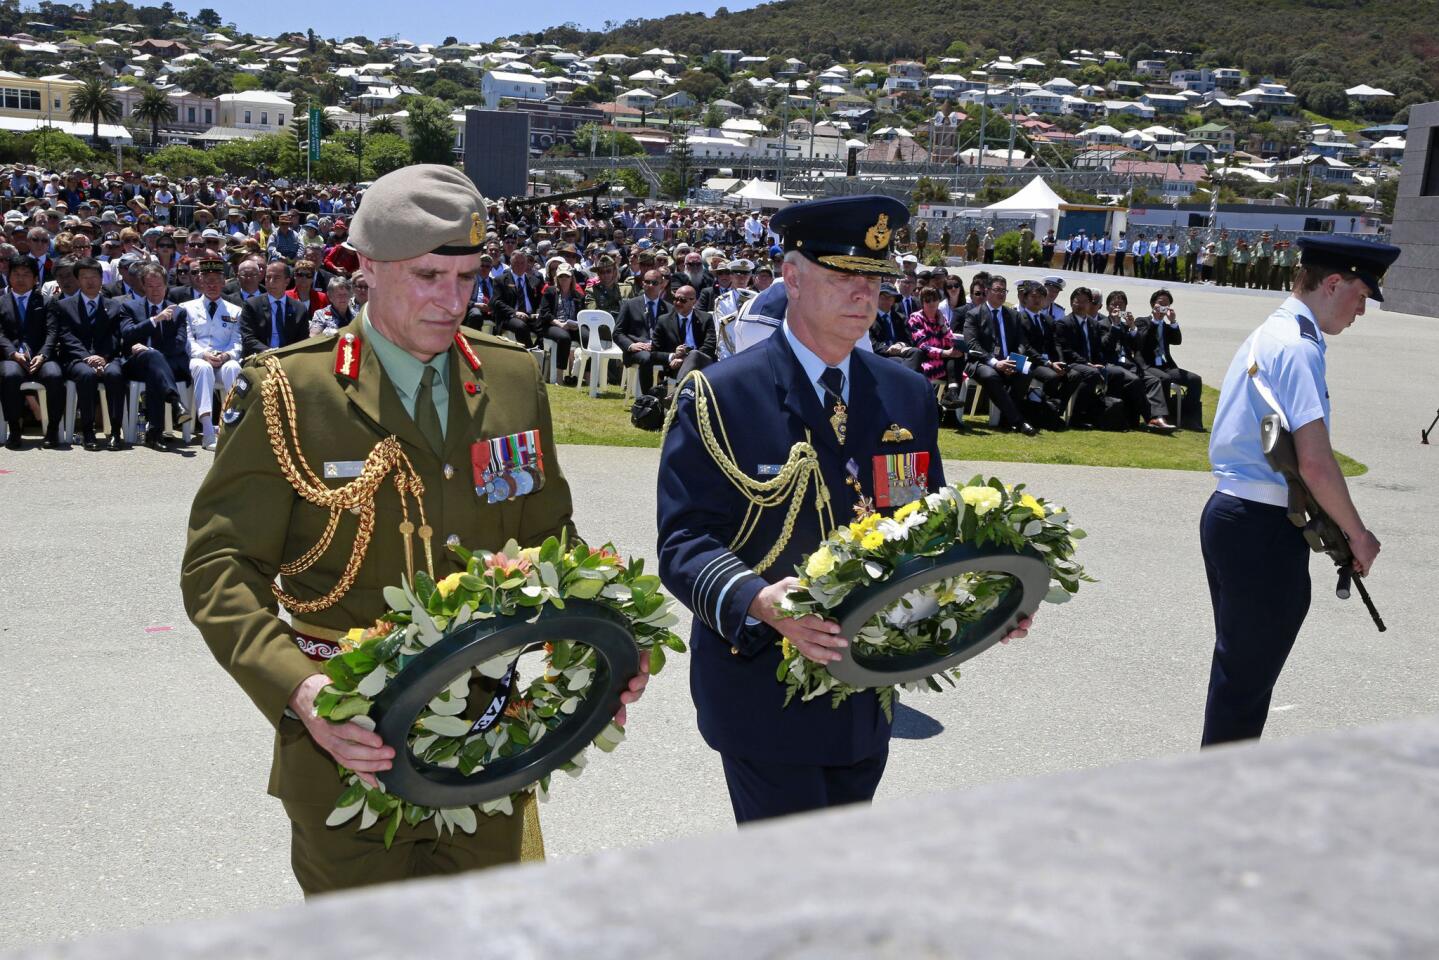 In late 2014, Australia and New Zealand marked 100 years since their first convoy of troops left for the battlefields of World War I. Anzac day -- April 25 -- will commemorate the day the two countries' soldiers arrived in Gallipoli, Turkey.